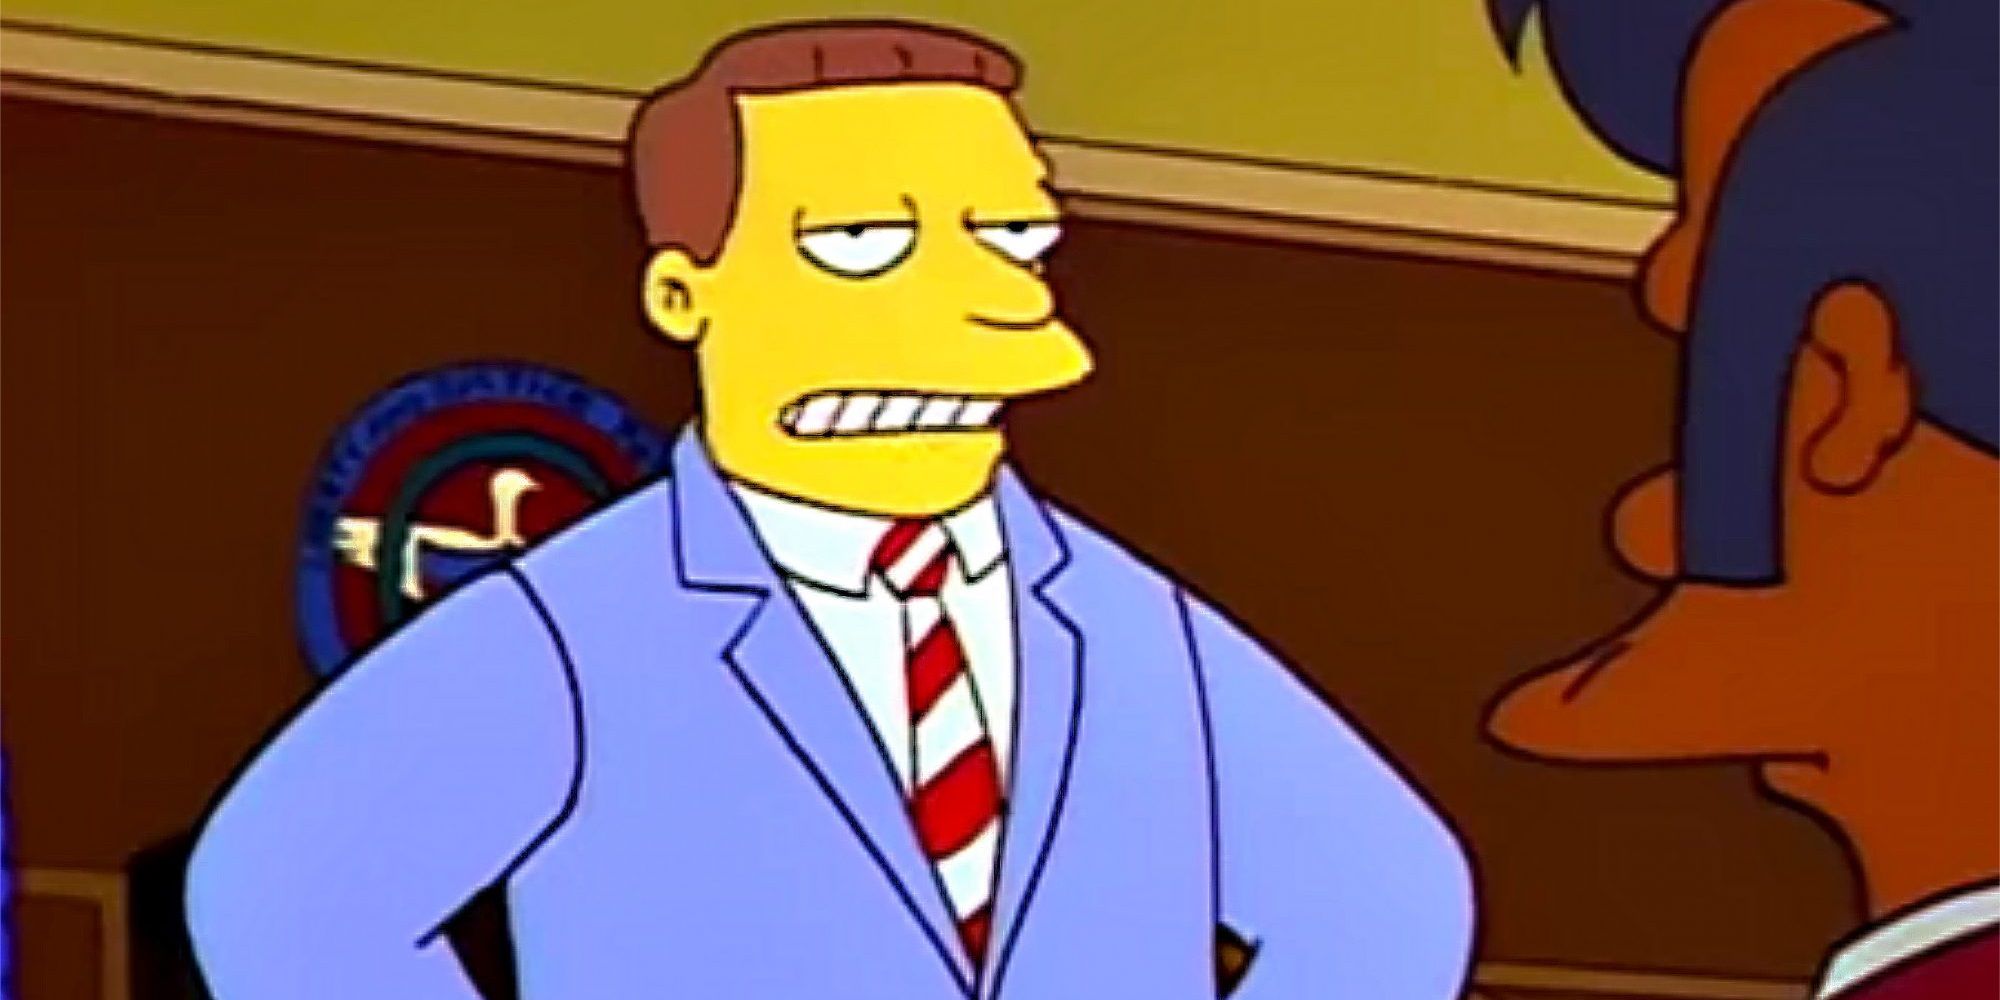 Lionel Hutz with his hands on his waist in The Simpsons